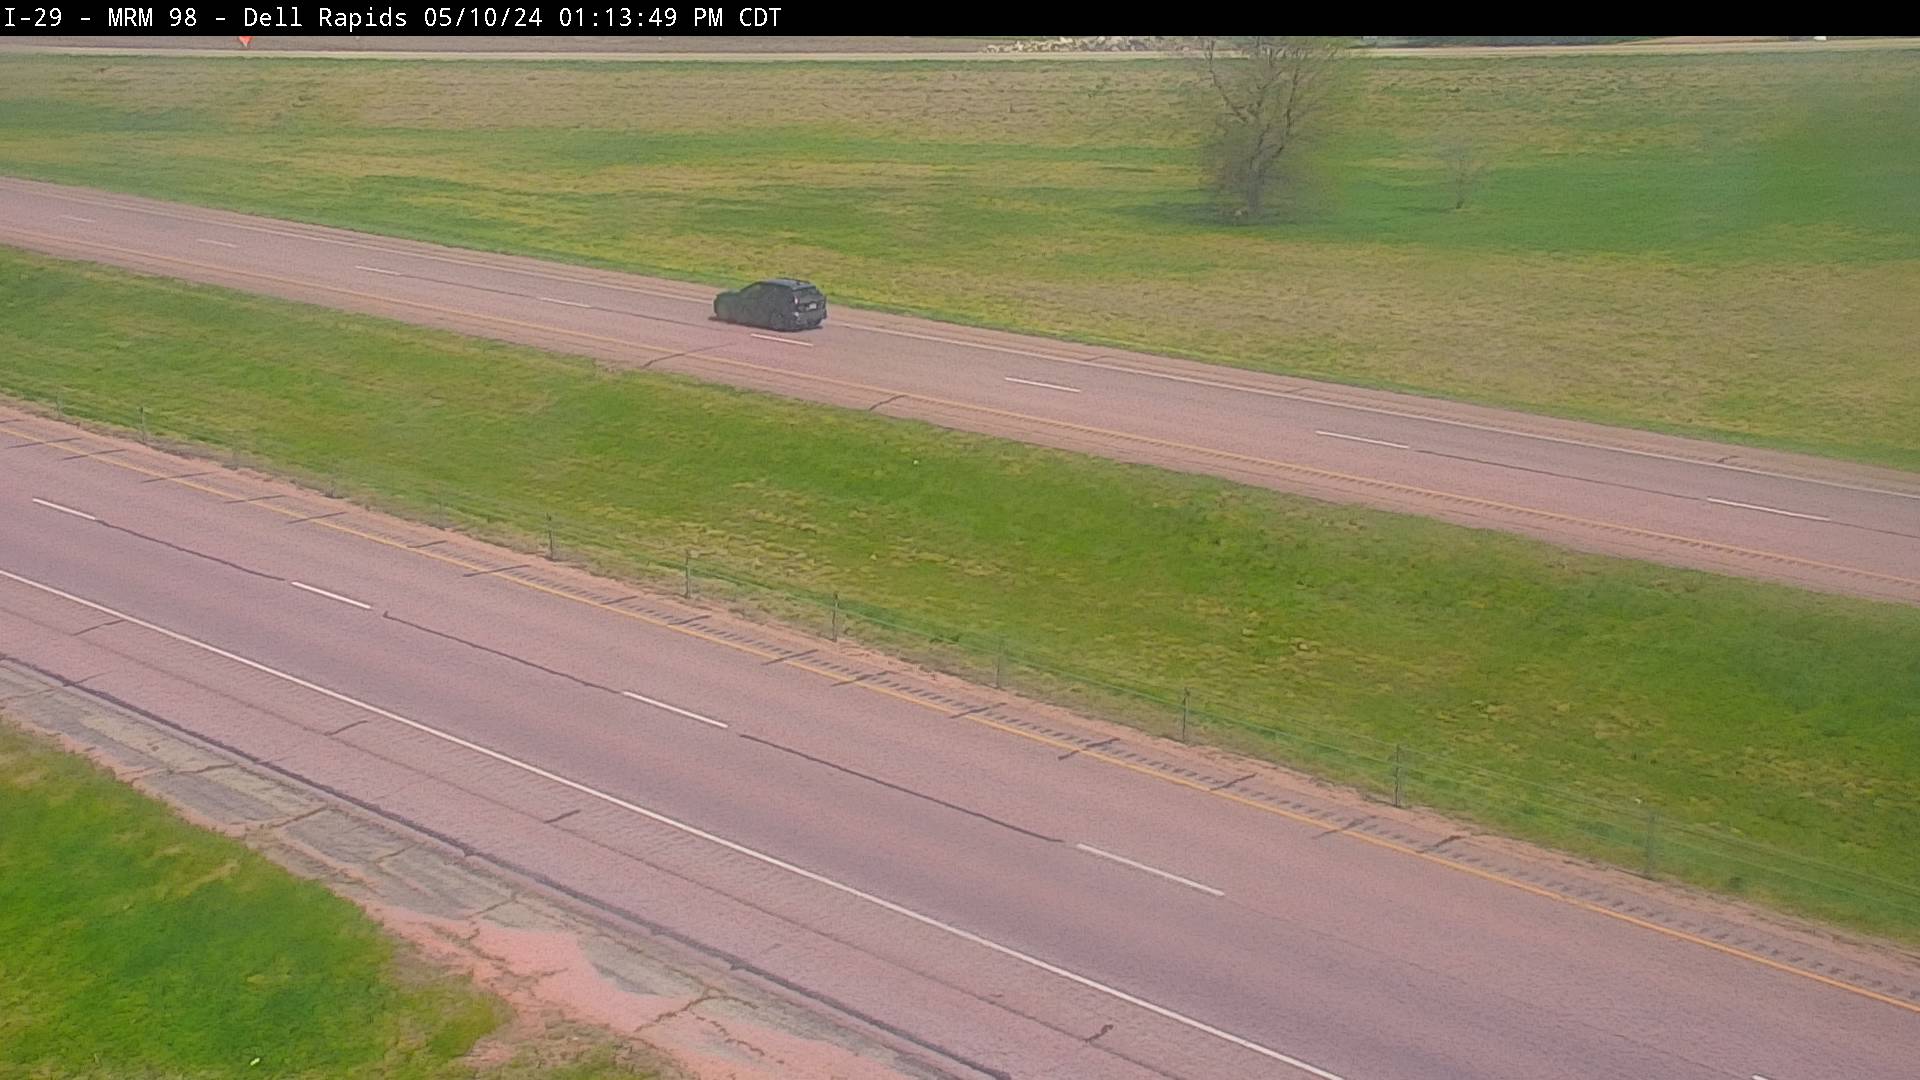 West of town along I-29 @ MP 98.4 - East Traffic Camera